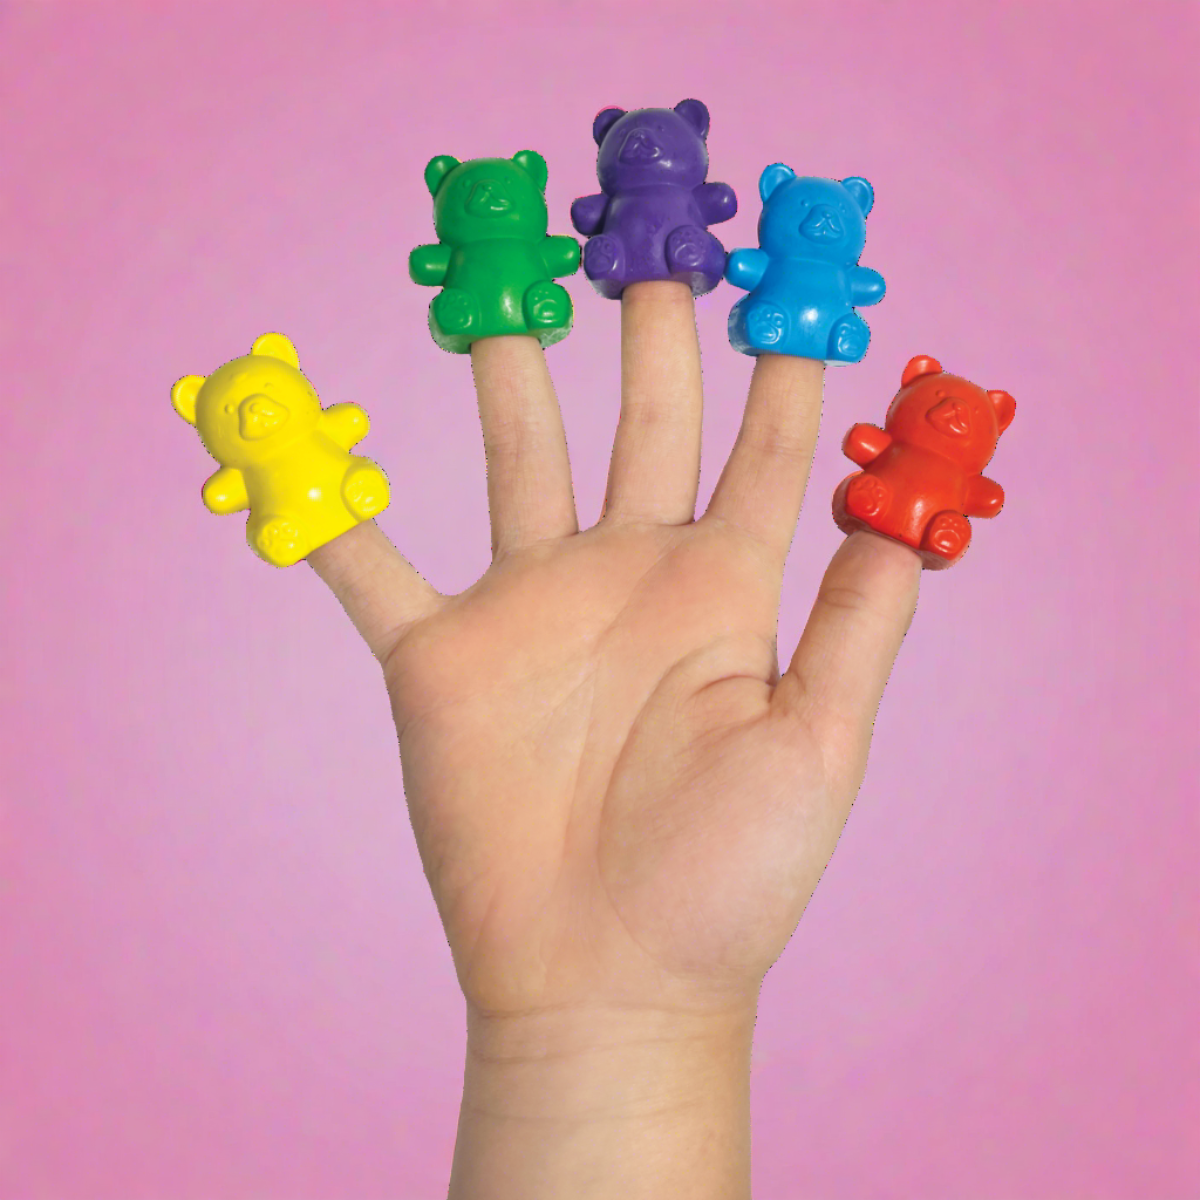 OOLY: Toddler's crayons for finger teddy bear cubdly cubs 6 pcs.